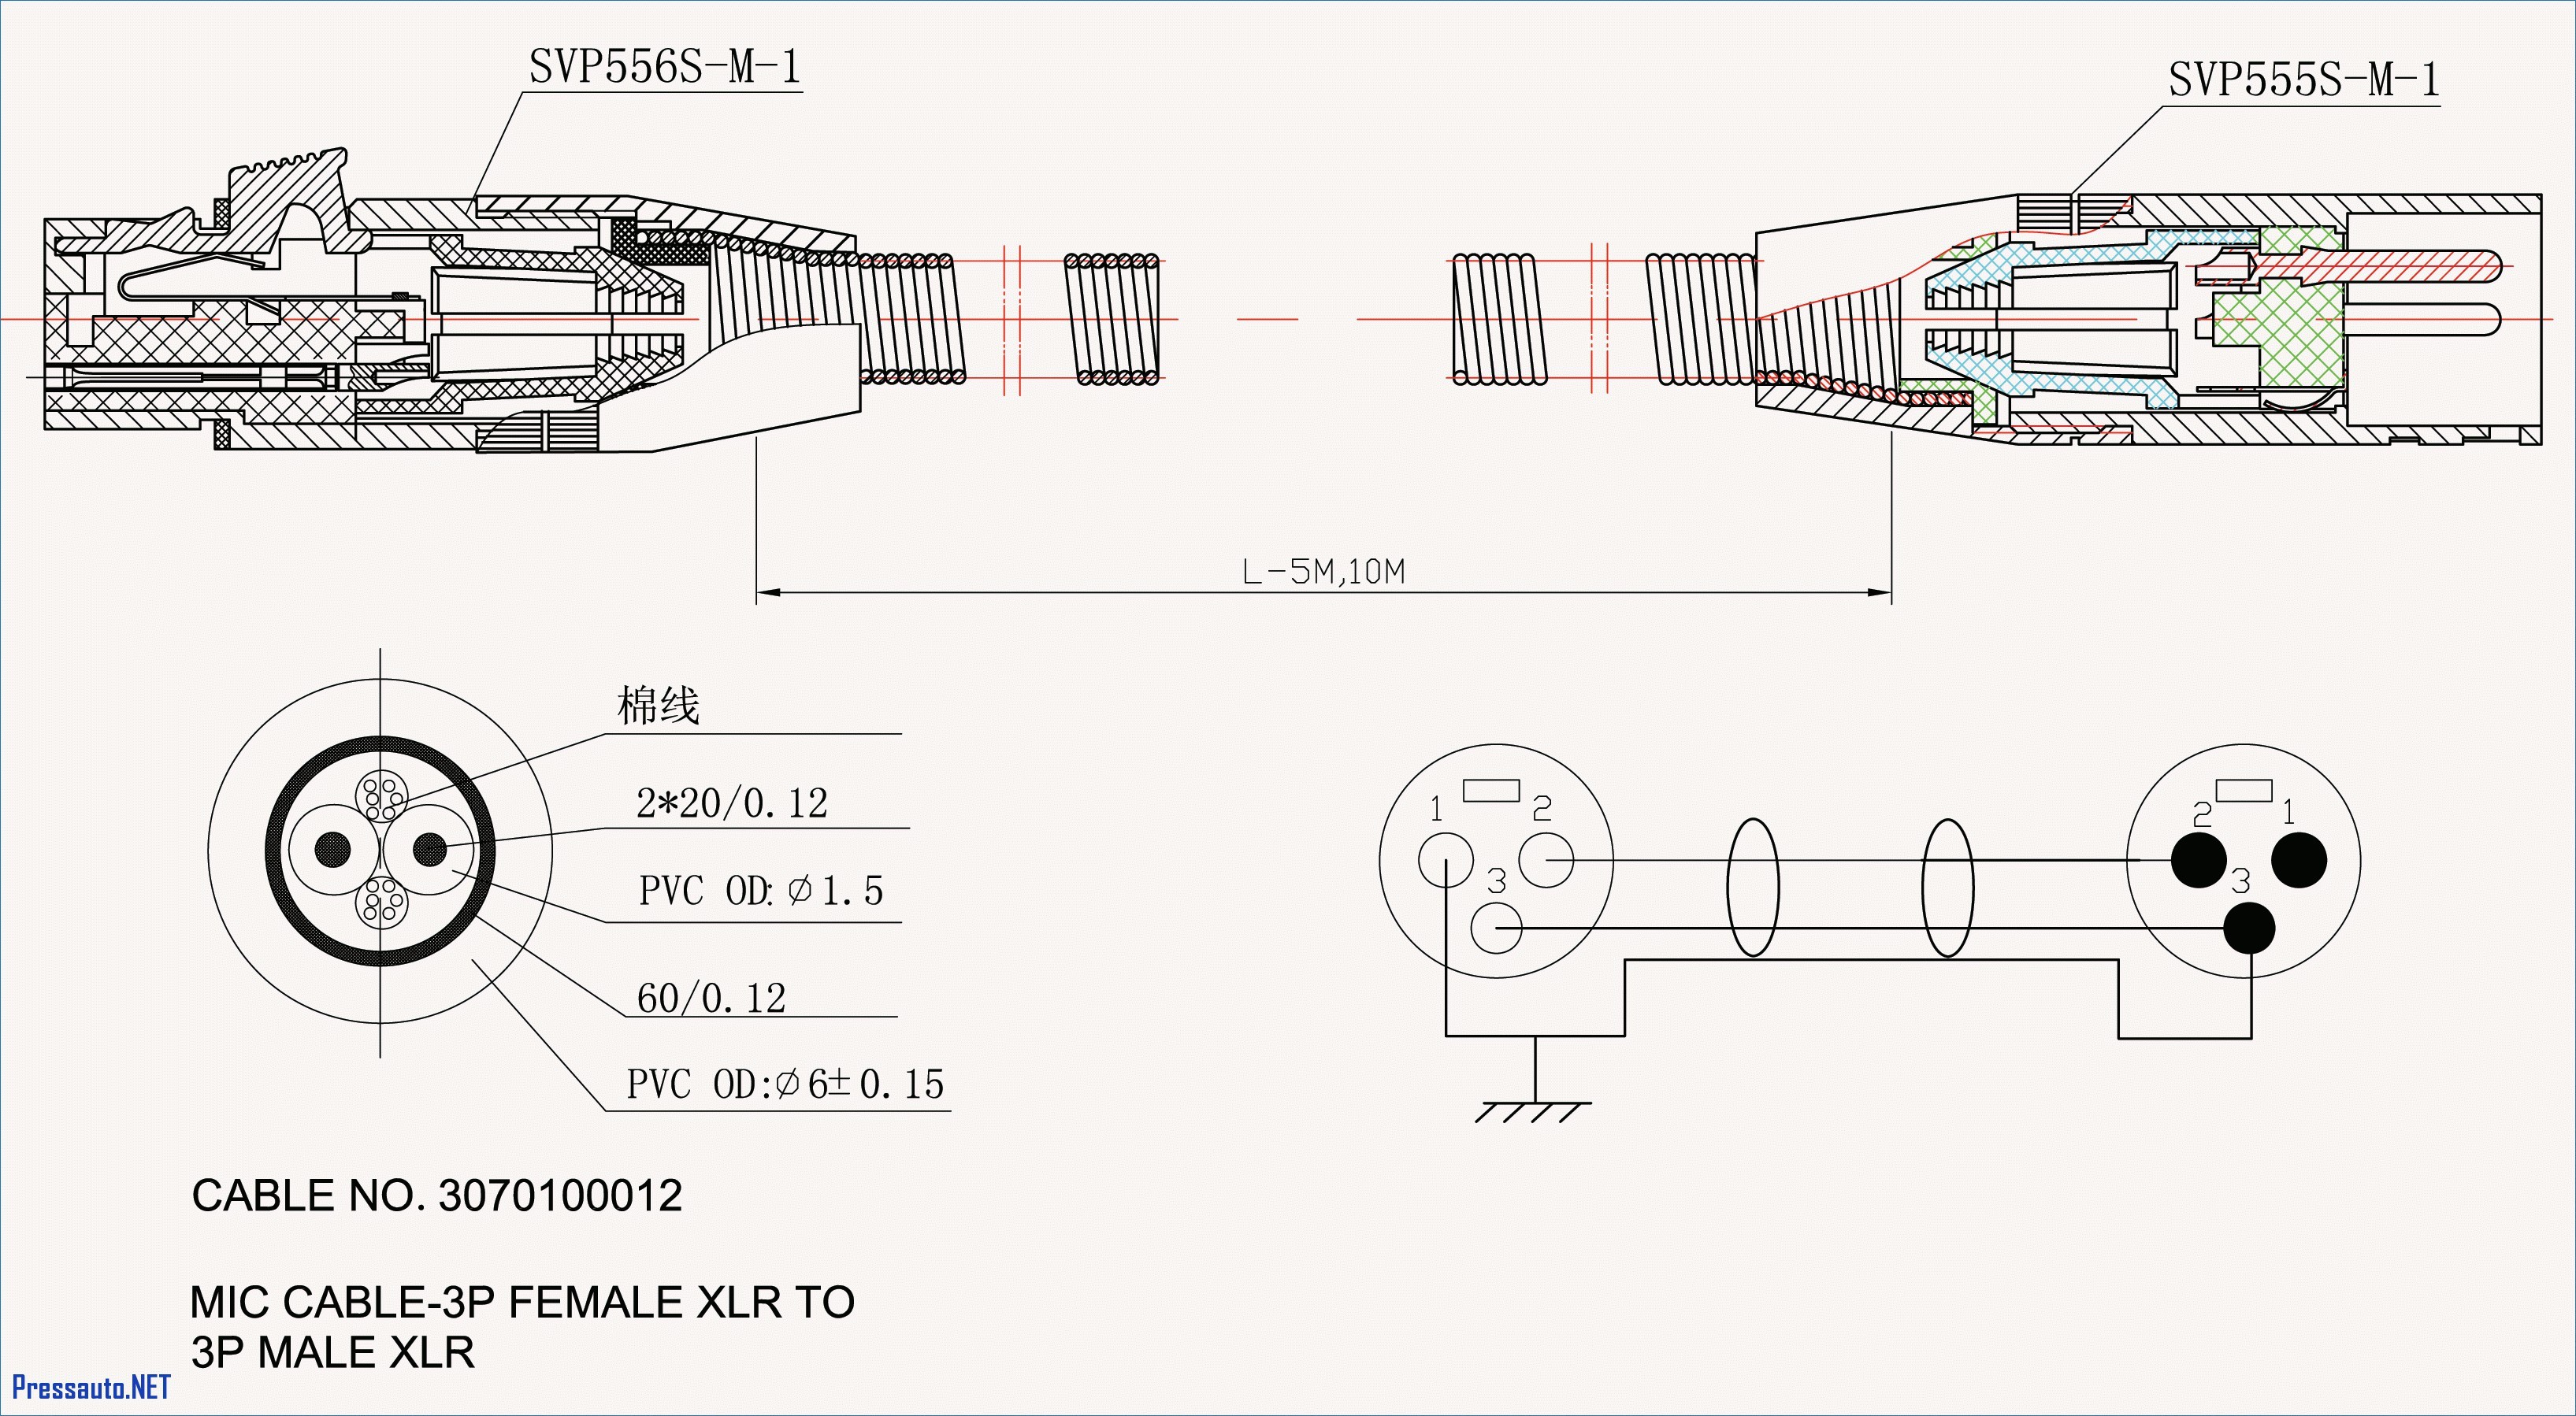 Wiring Diagram For Australian Trailers Save Trailer Connector Wiring Diagram Fresh Wire Diagram For Trailer